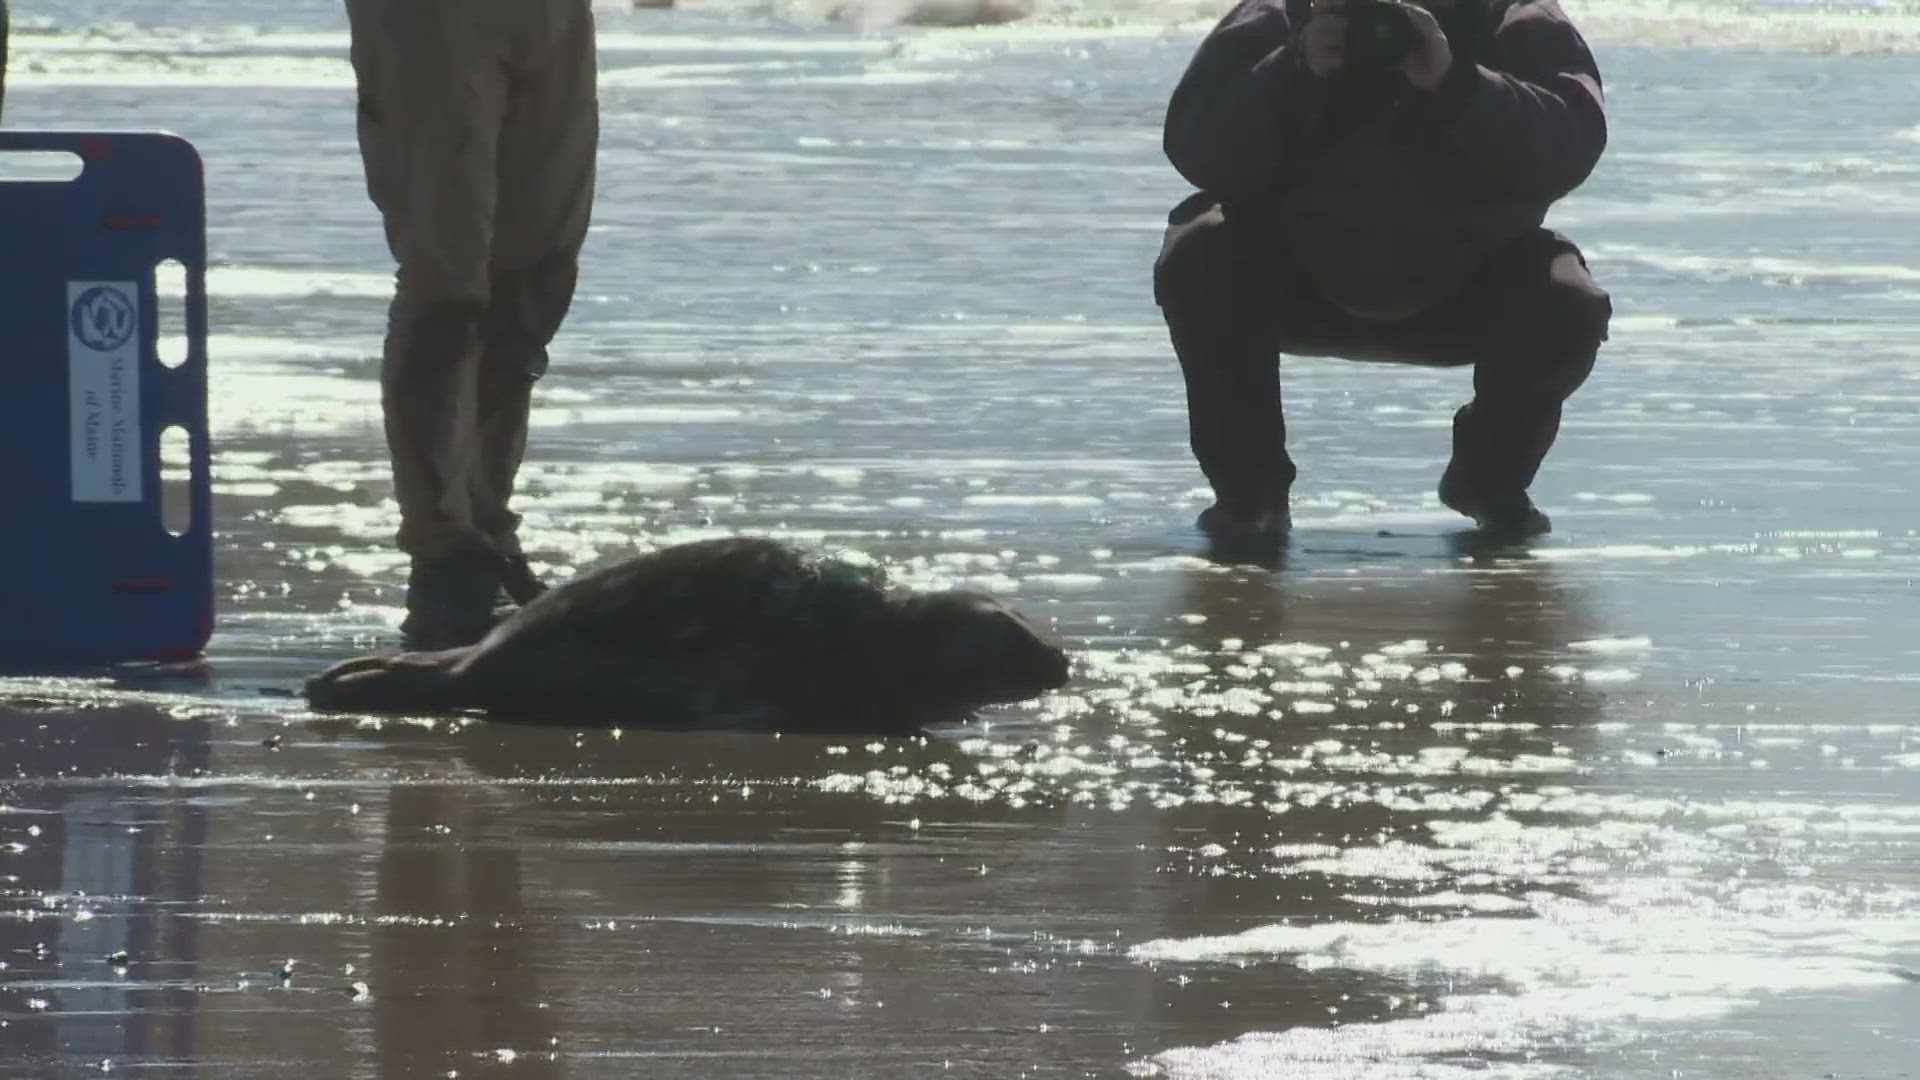 Dexxy and Sunshine, both found stranded in January, were released back into the ocean Thursday in Phippsburg after rehabilitating with Marine Mammals of Maine.